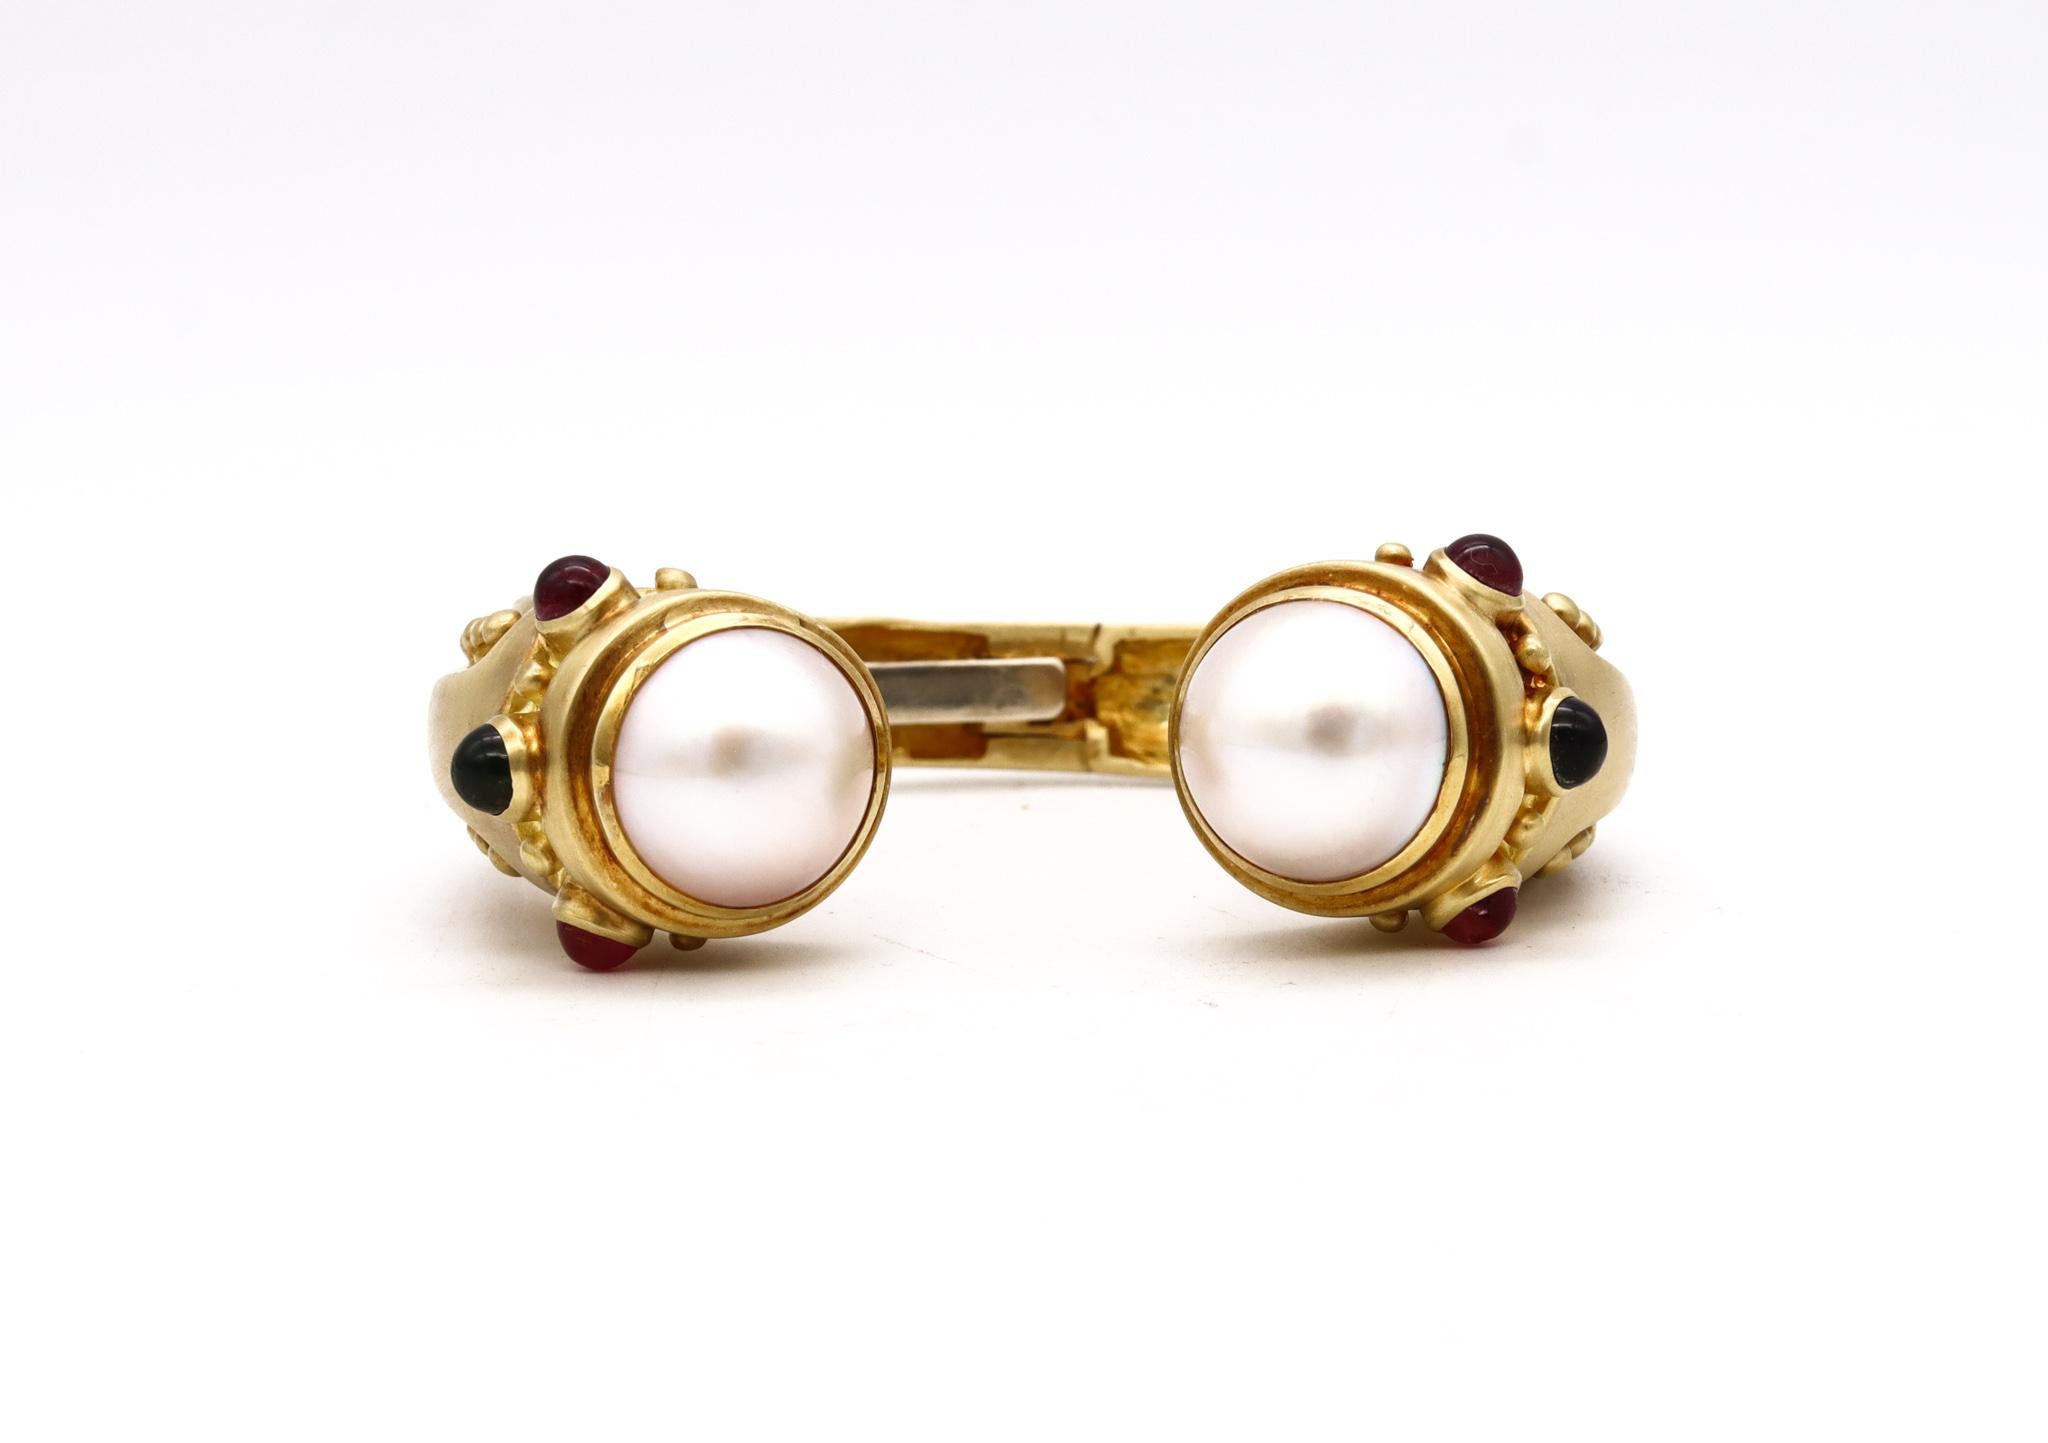 Marlene Stowe Cuff Bracelet in 18Kt Brushed Gold with Mabe Pearls and Tourmaline For Sale 2